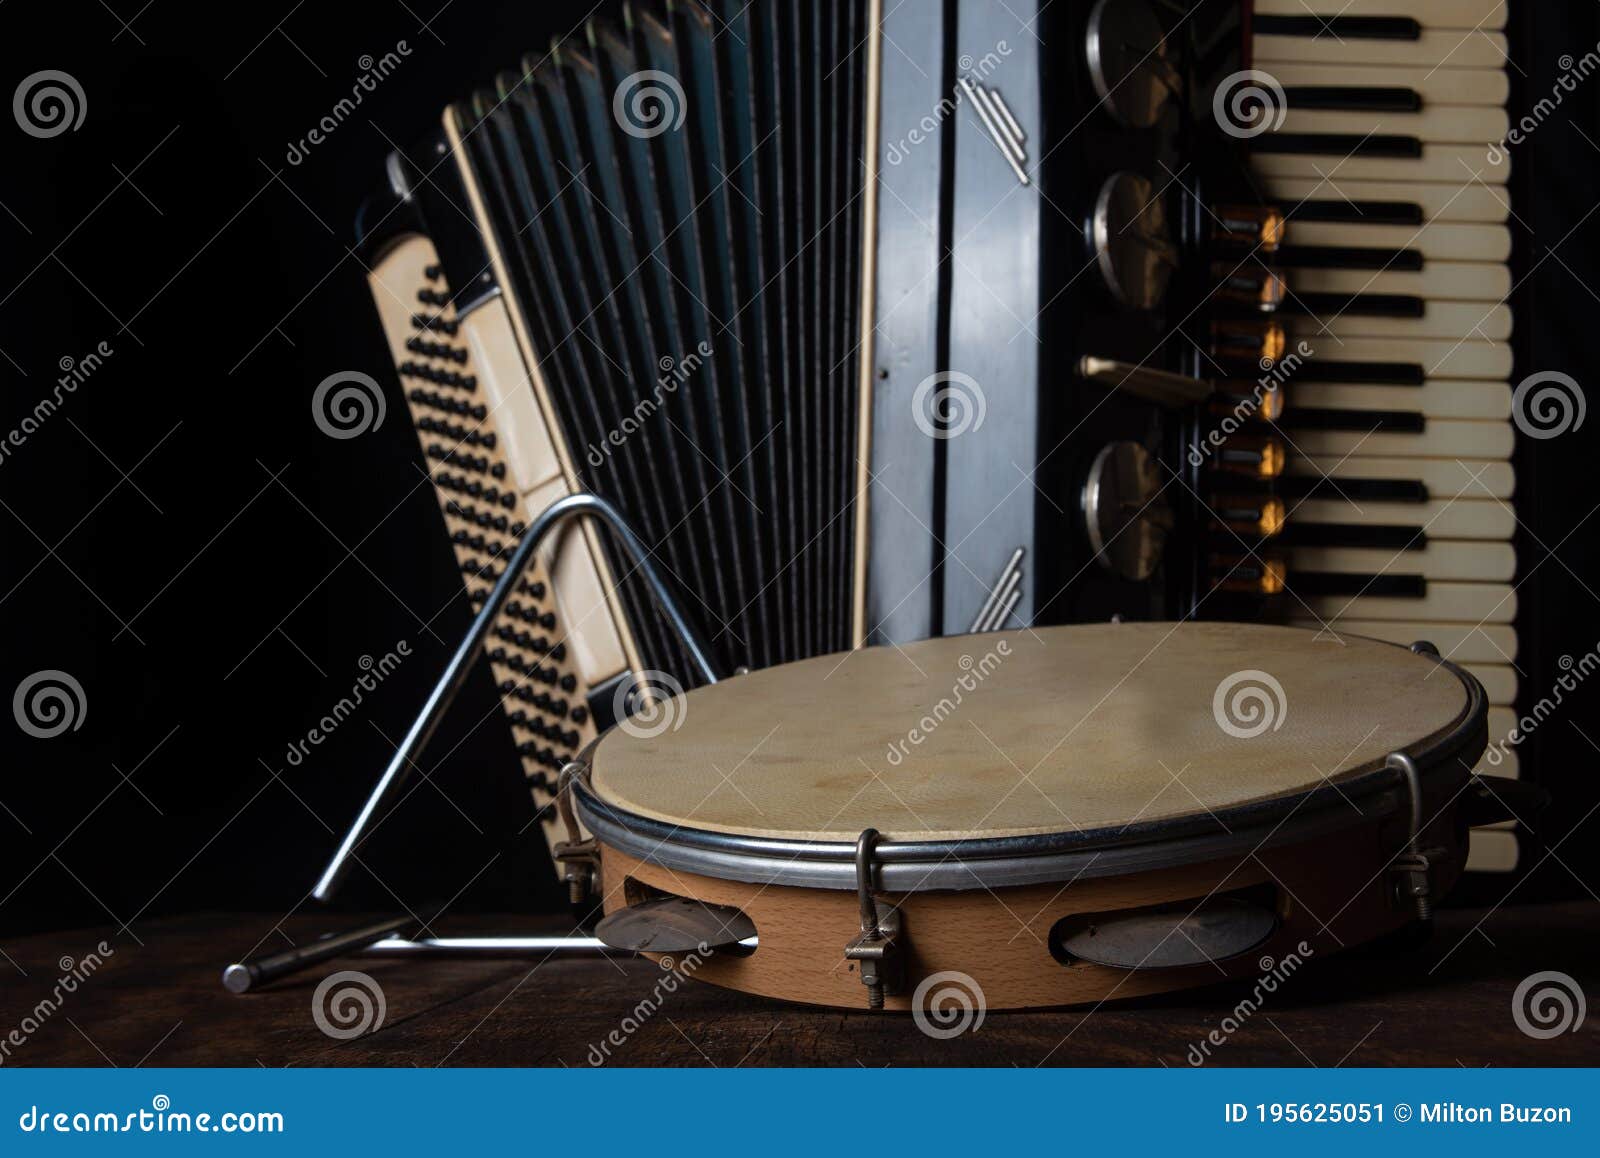 old accordion, tambourine and triangle on rustic wooden surface with black background and low key lighting, selective focus